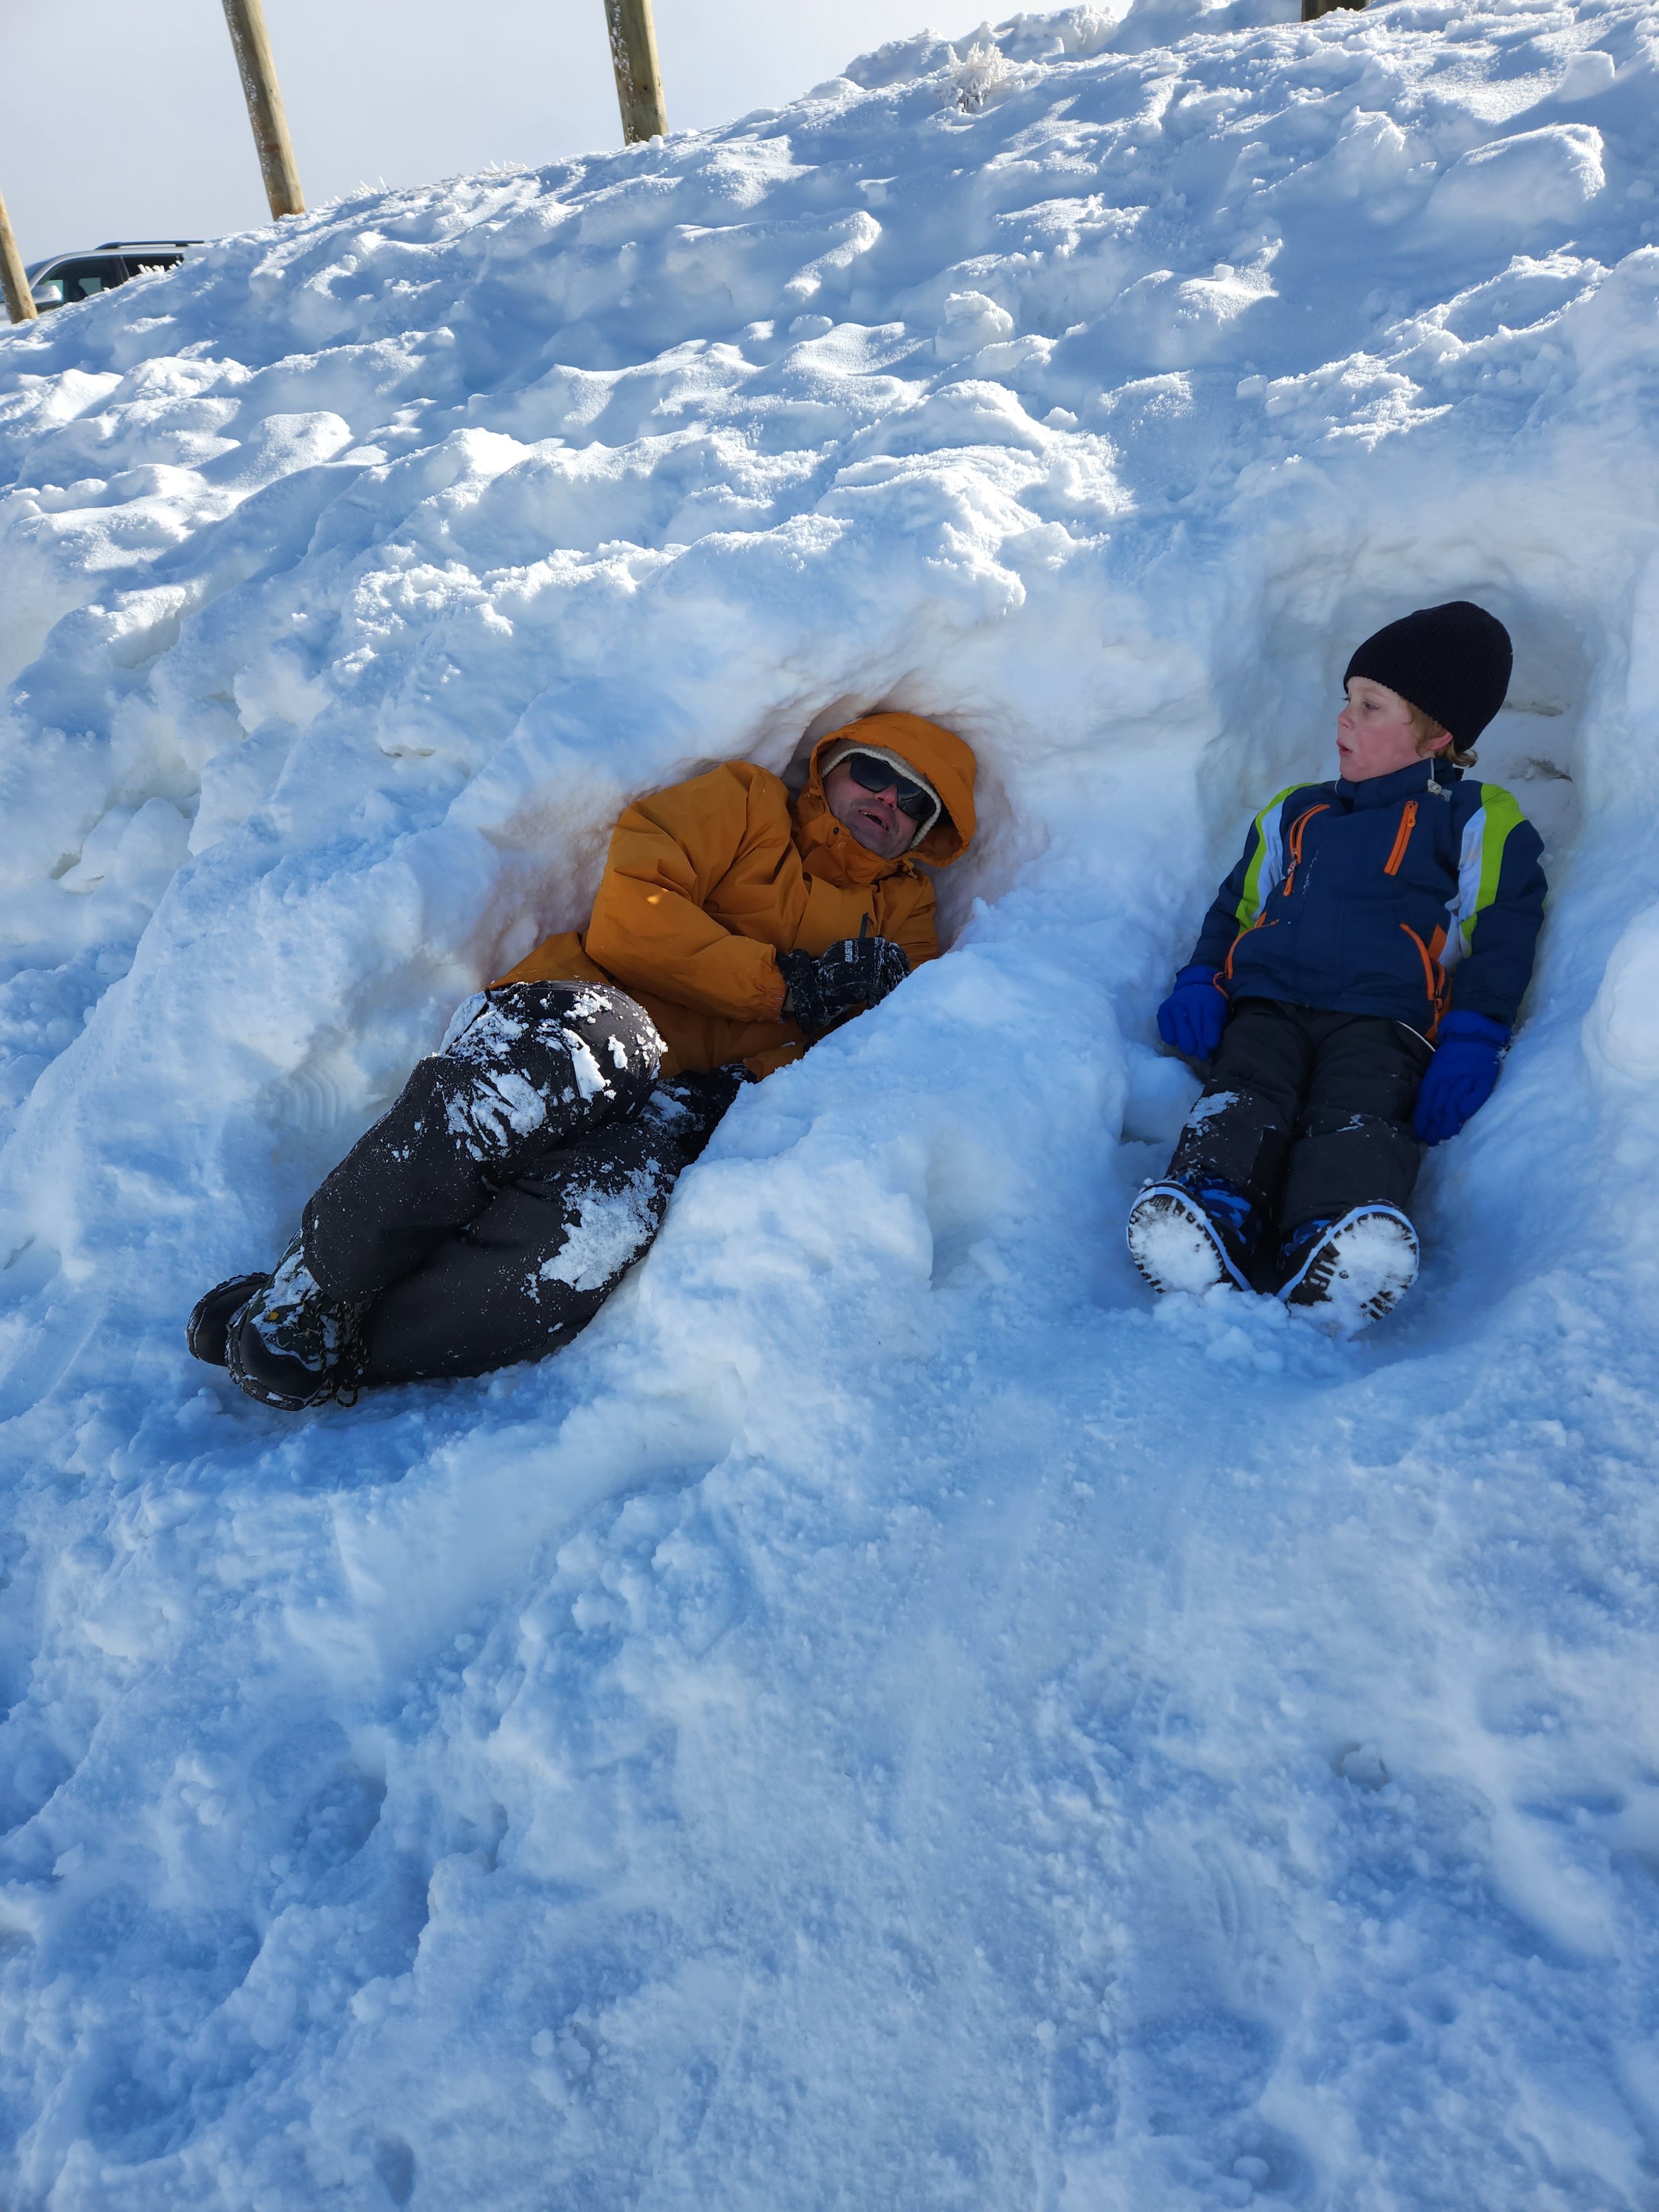 More fun snow play, lucky we had good waterproof clothes